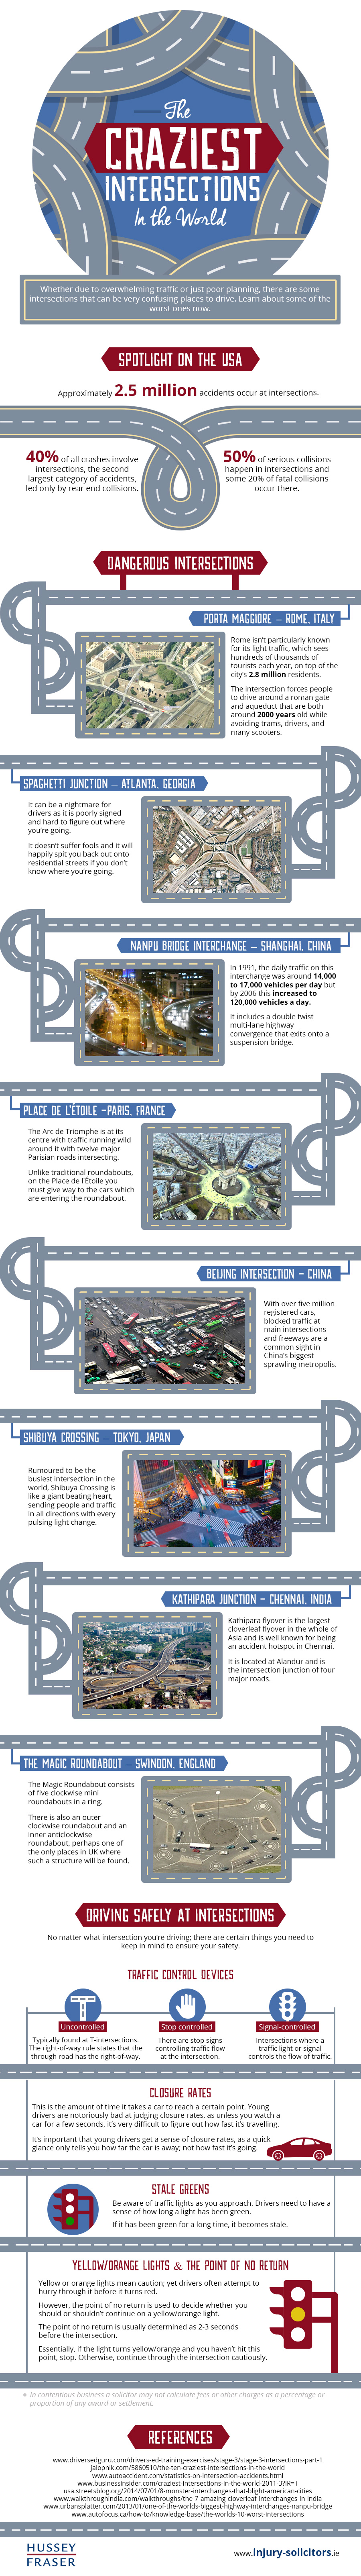 The Craziest Intersections in the World